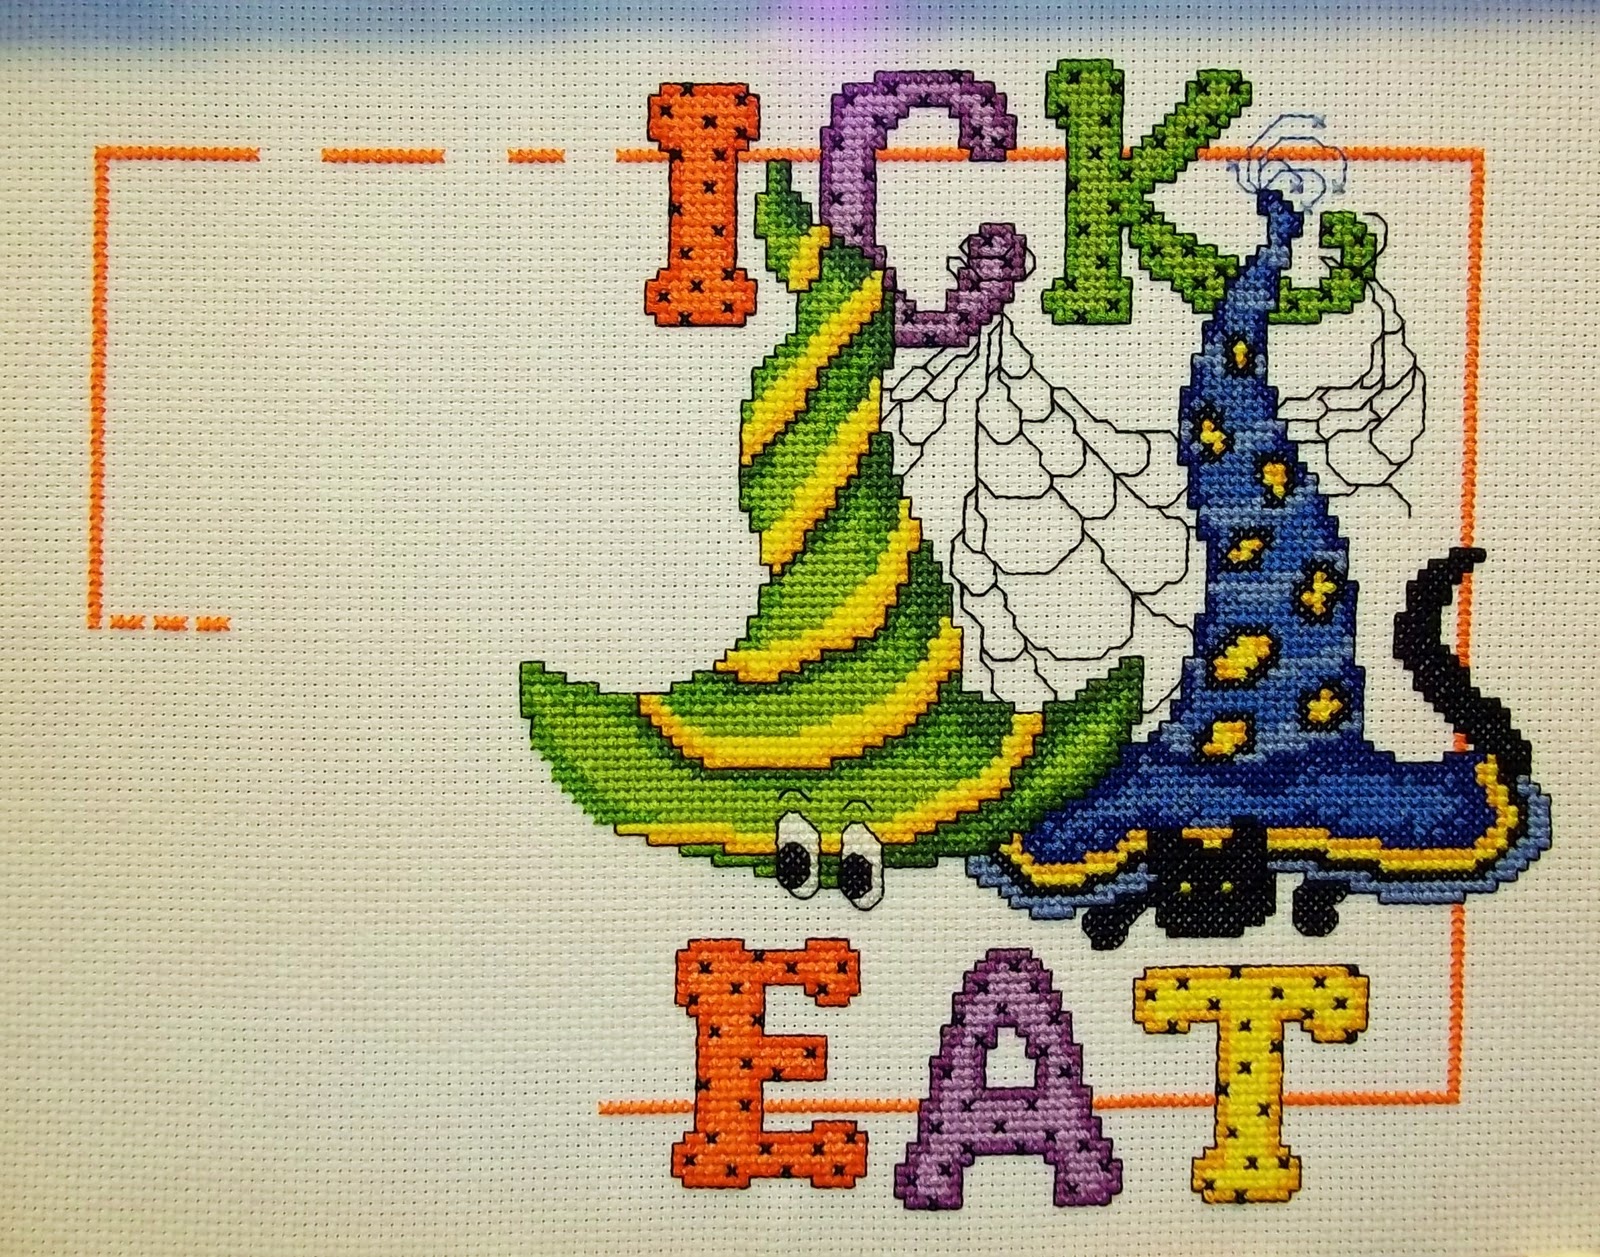 WIP] switched to a qsnap frame from a wooden hoop! any advice? (Fall Fairy  by Dimensions) : r/CrossStitch